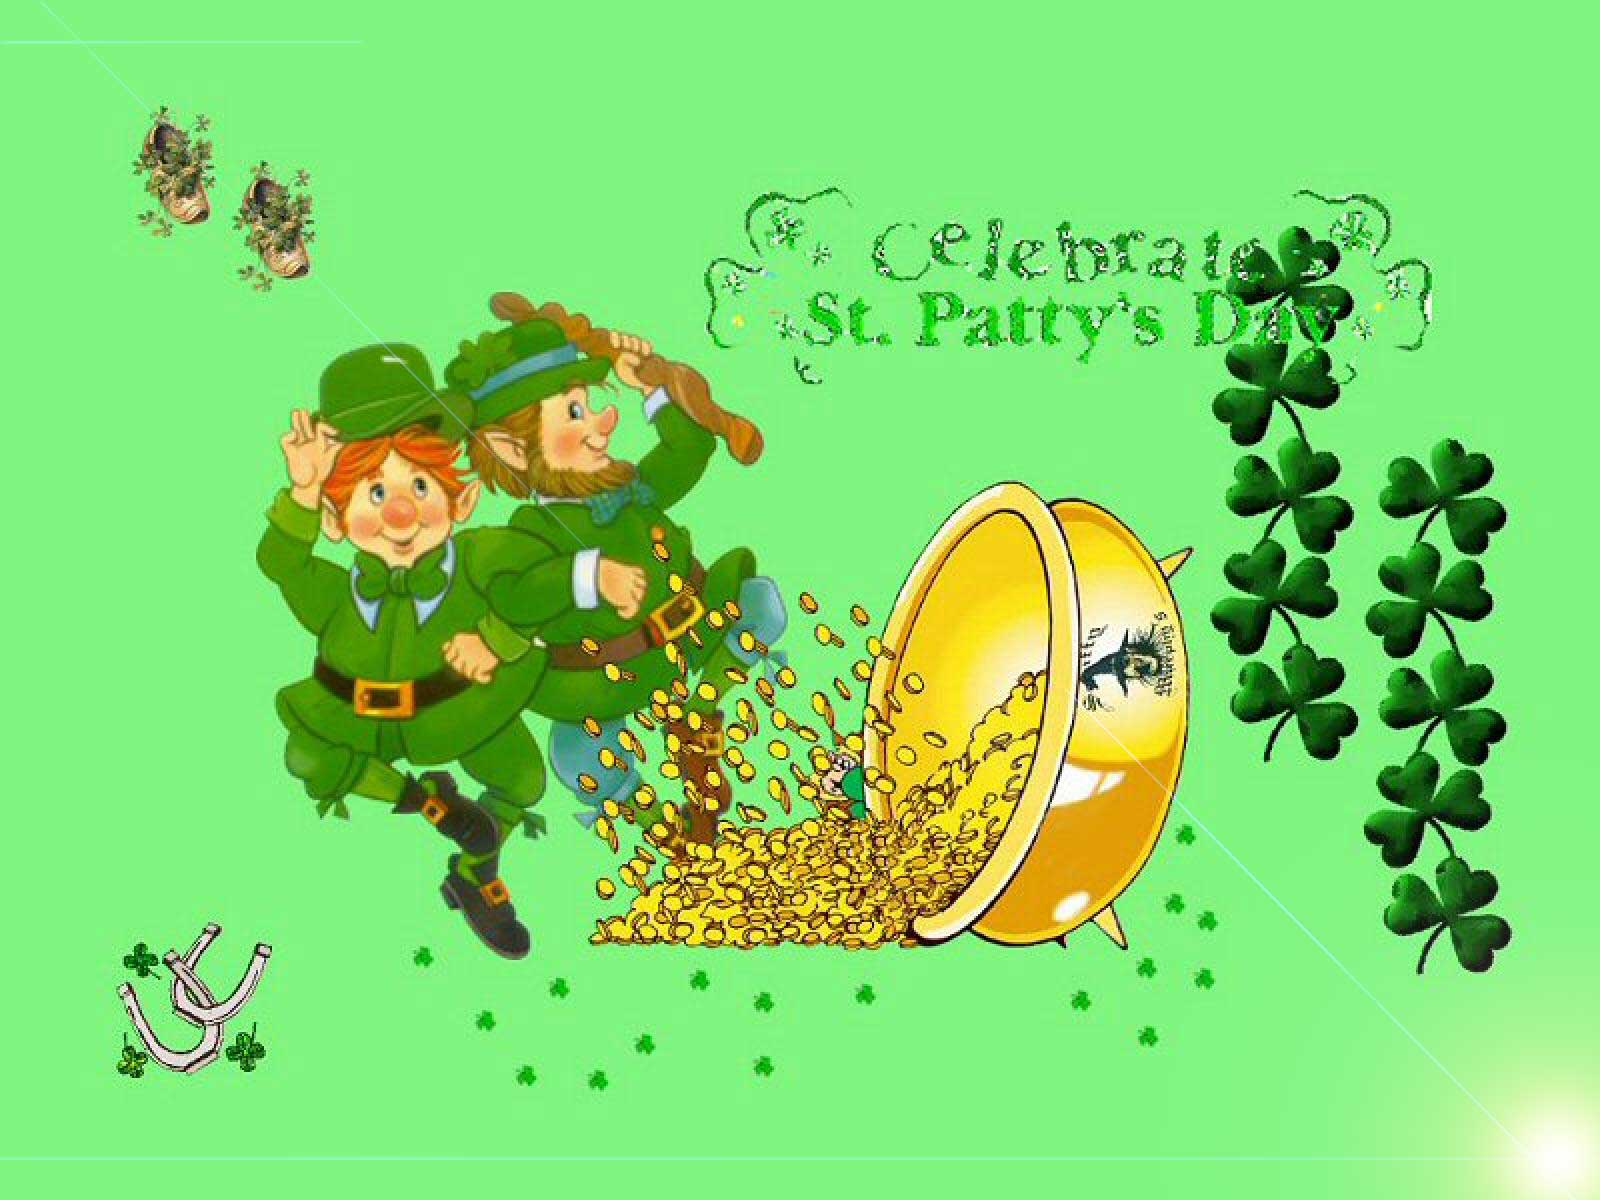 Gallery St Patrick S Day Greetings Wallpaper